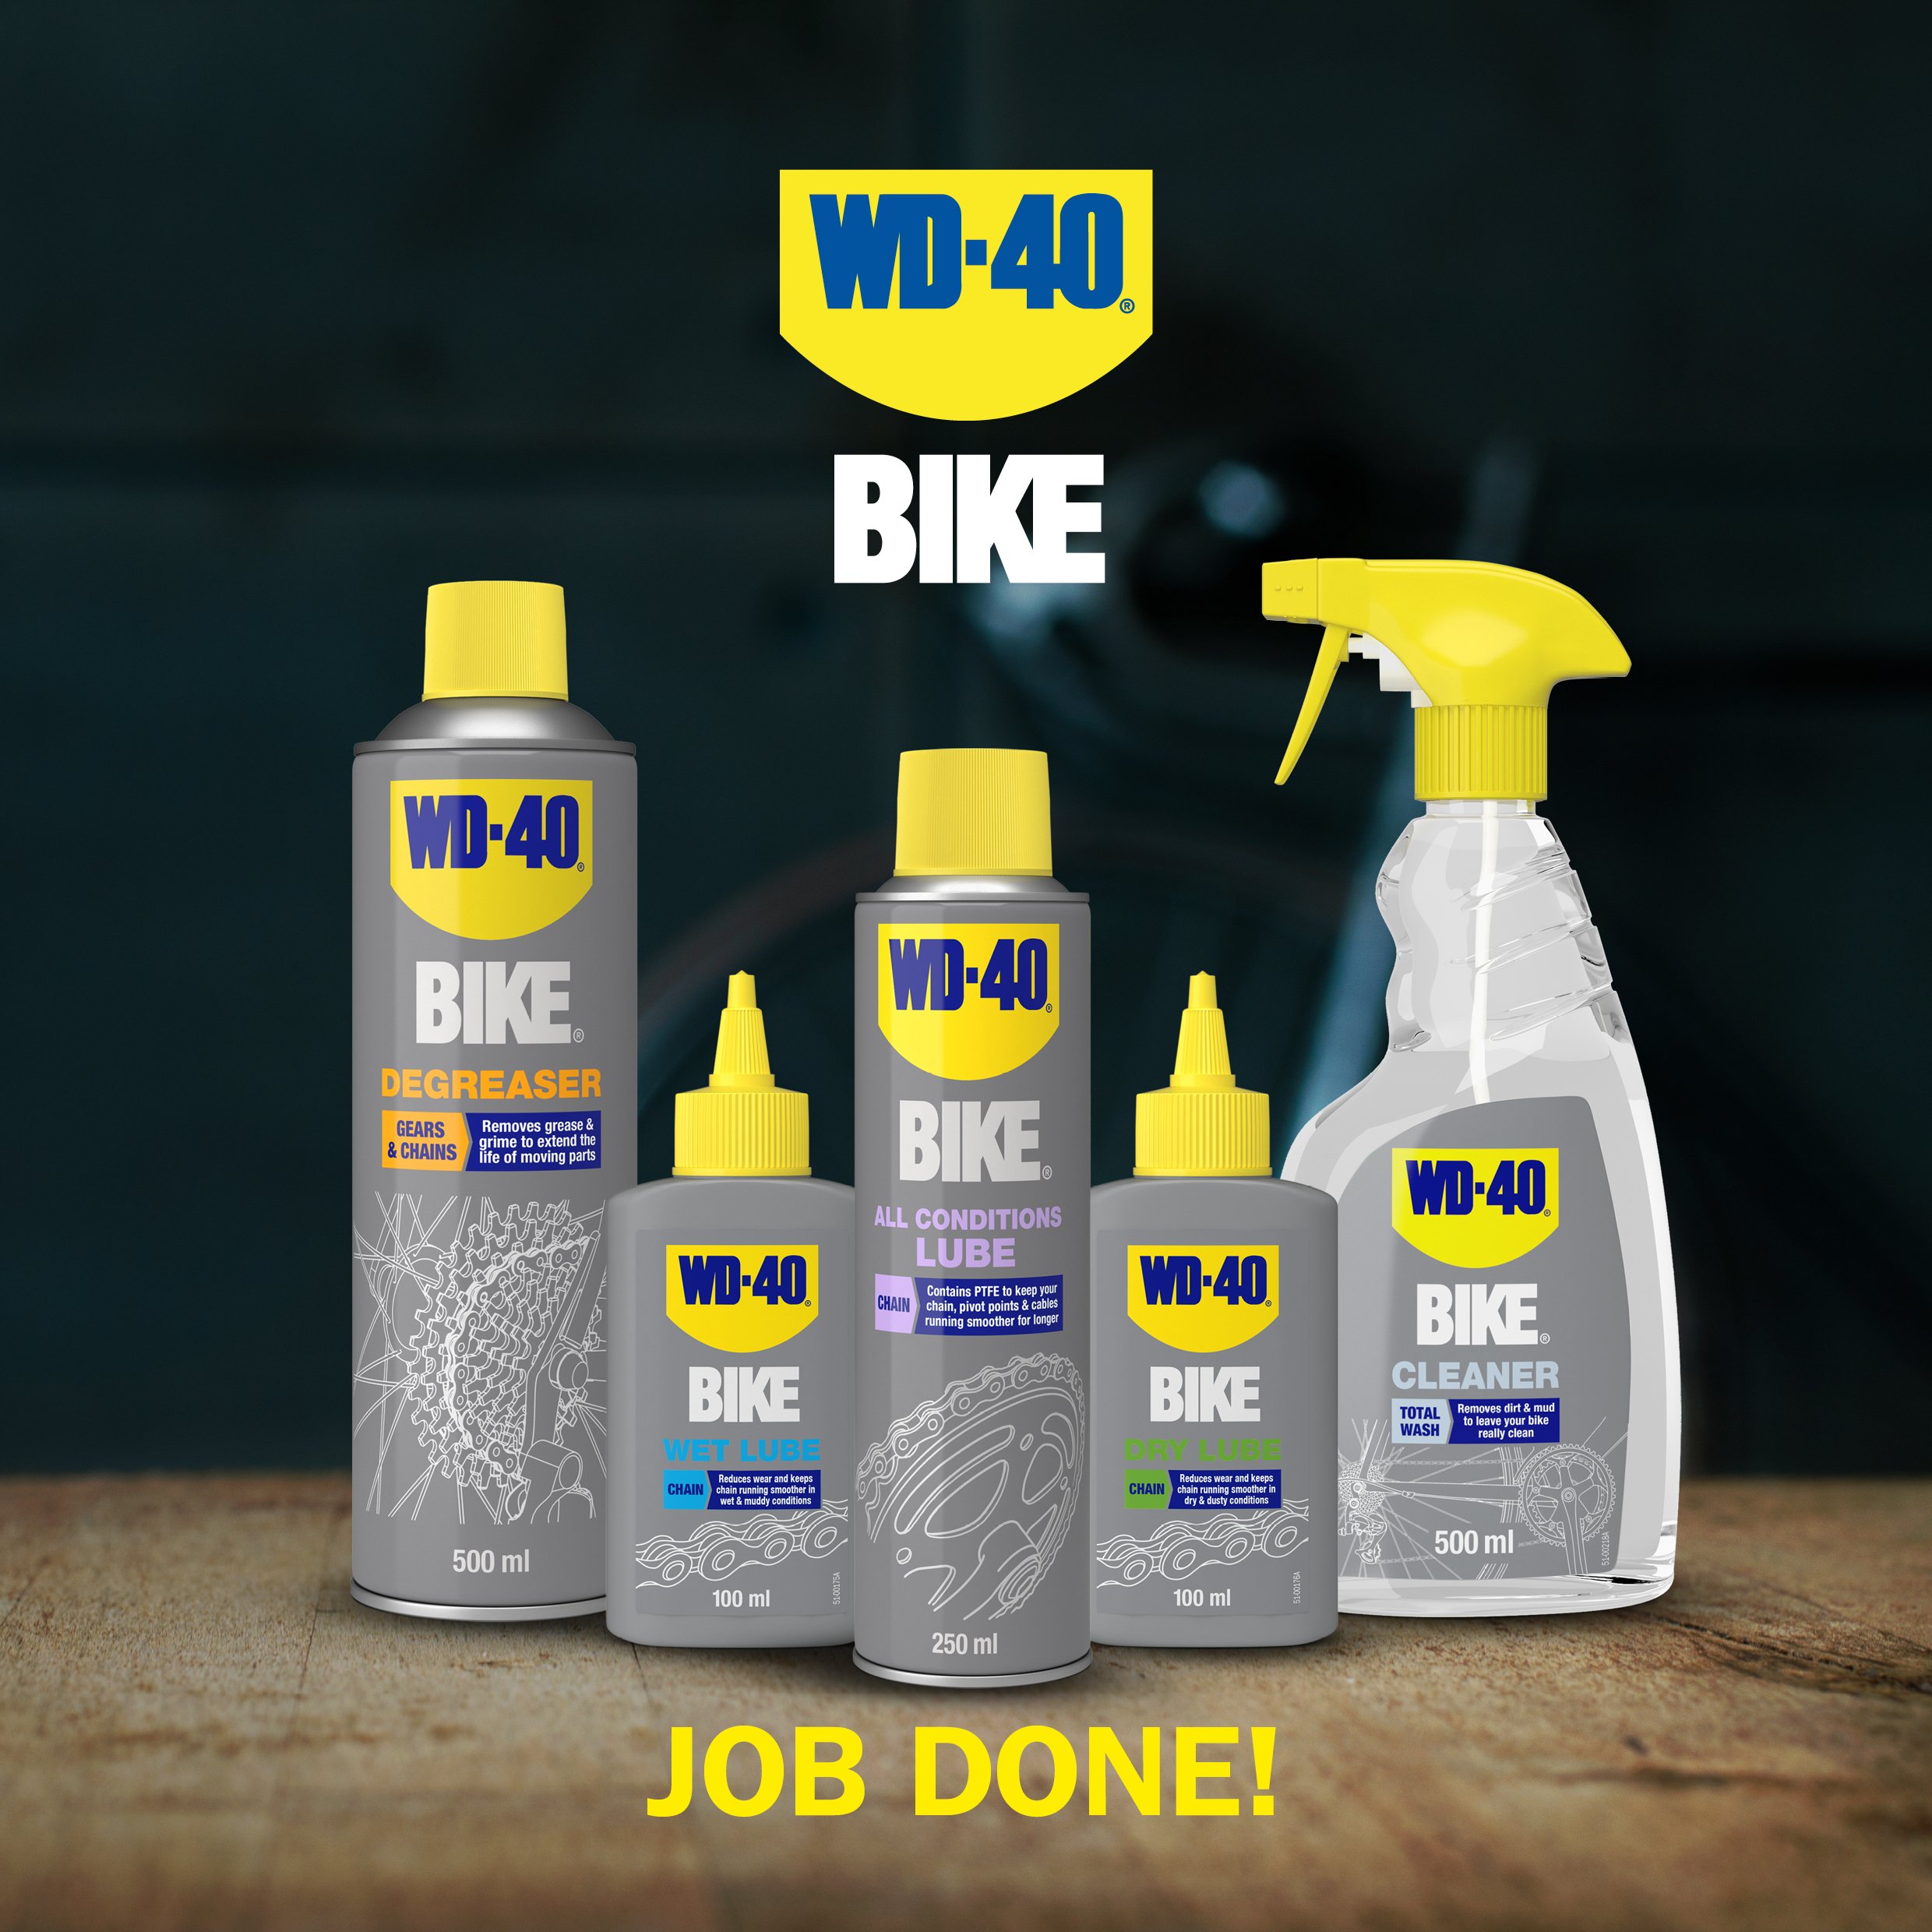 WD40_Bike_All_Conditions_Lube_How_To_Use_Part_6.jpg